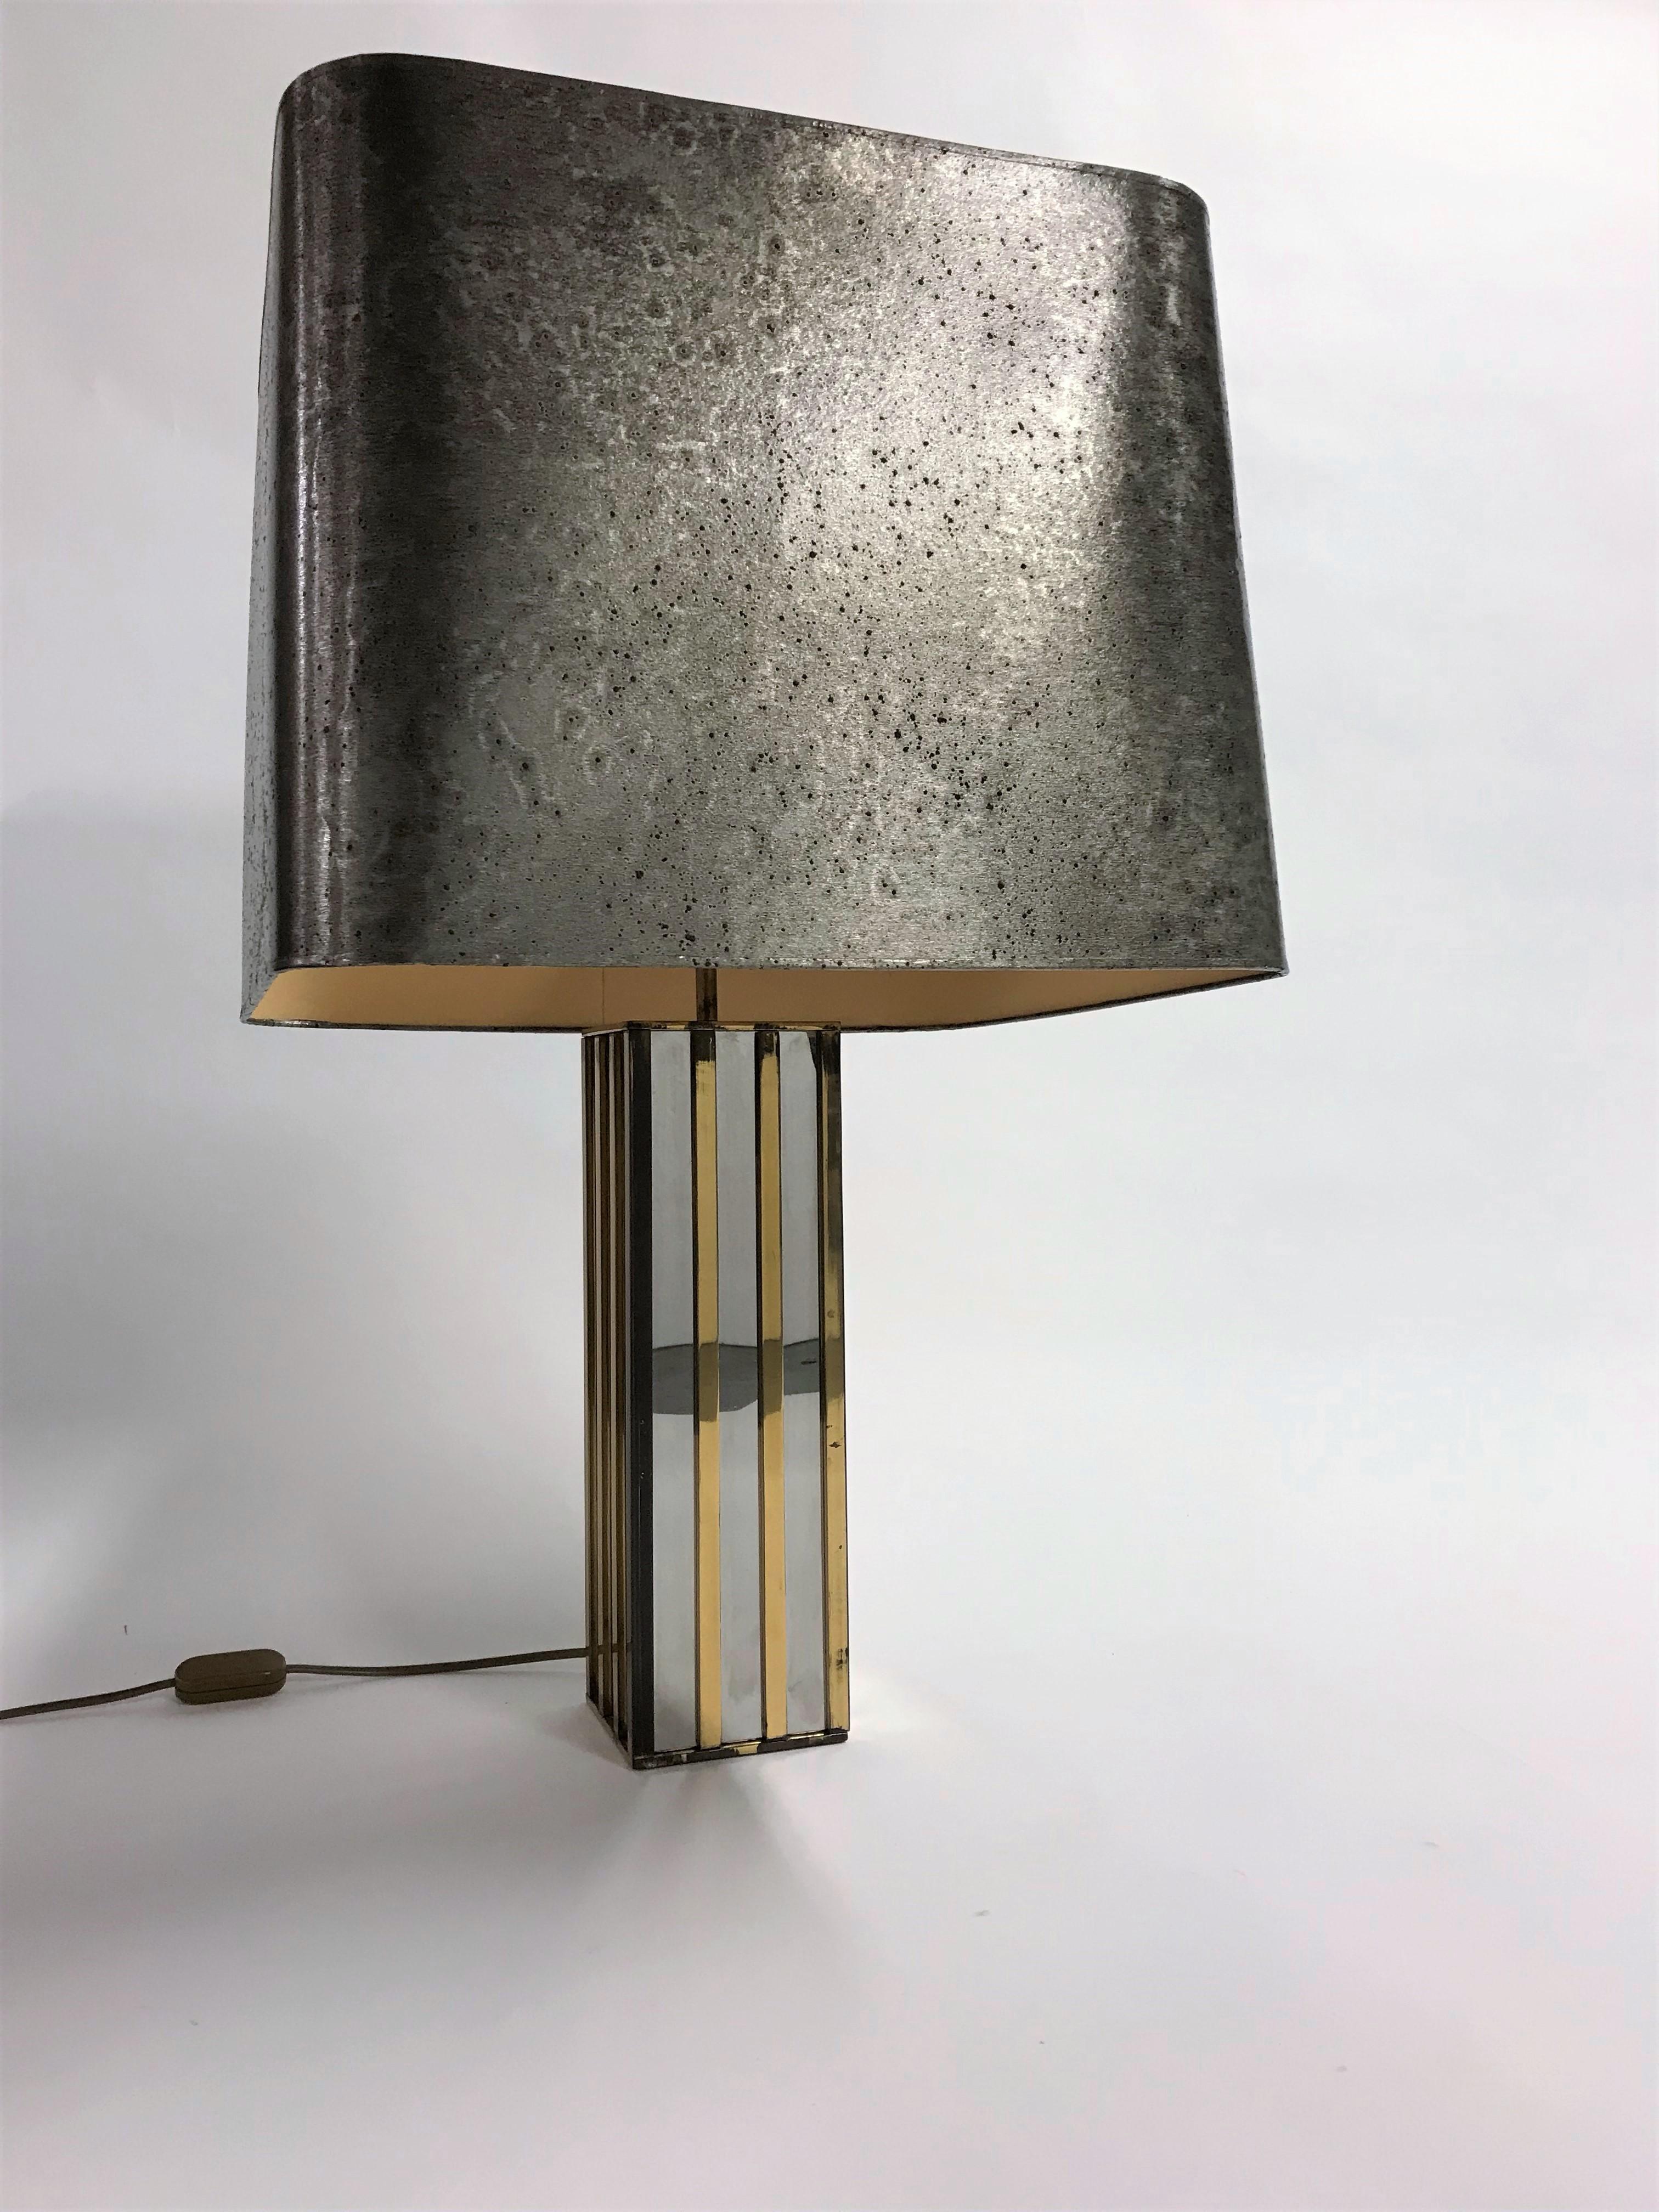 Remarkable table lamp by Gaetano Sciolari table lamp.

It is made of brass and mirrored glass.

The lamp has a wonderful original metal-look shade.

Beautiful patina.

Featuring two regular E14 light points, tested and ready to use (works